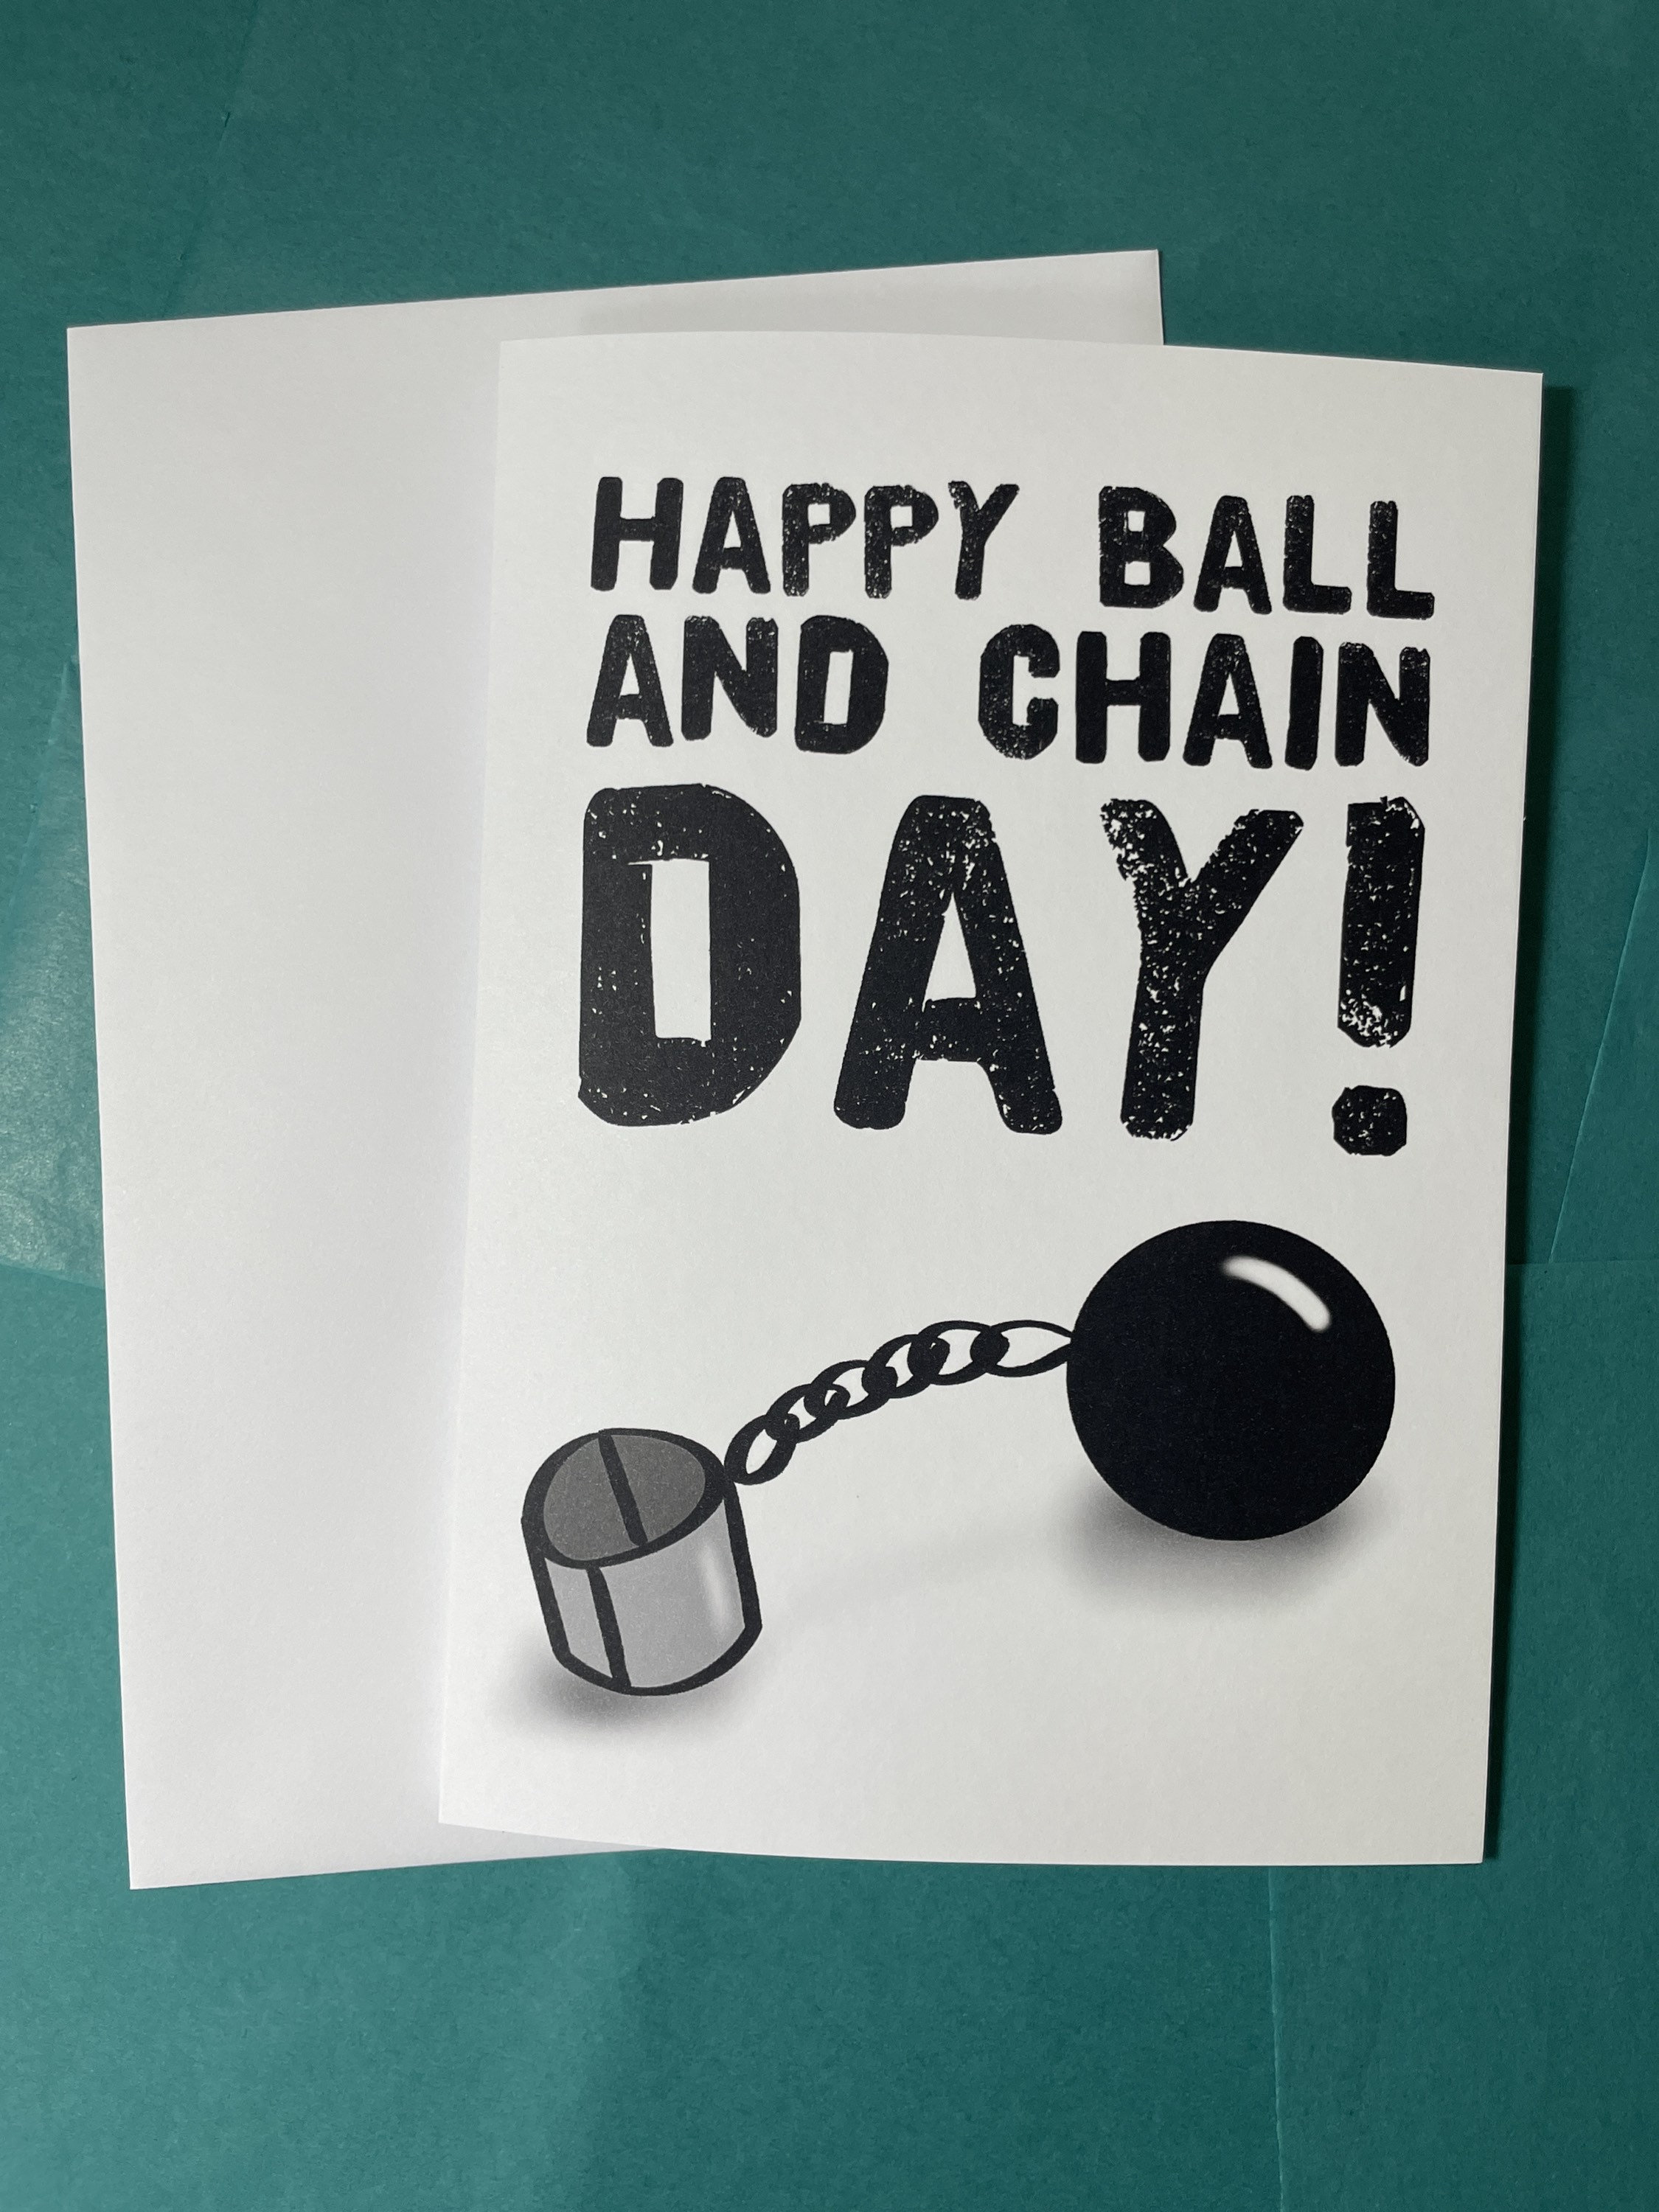 Ball and Chain Wedding Gag Gift - $3.49 : , Unique Gifts and  Fun Products by FunSlurp